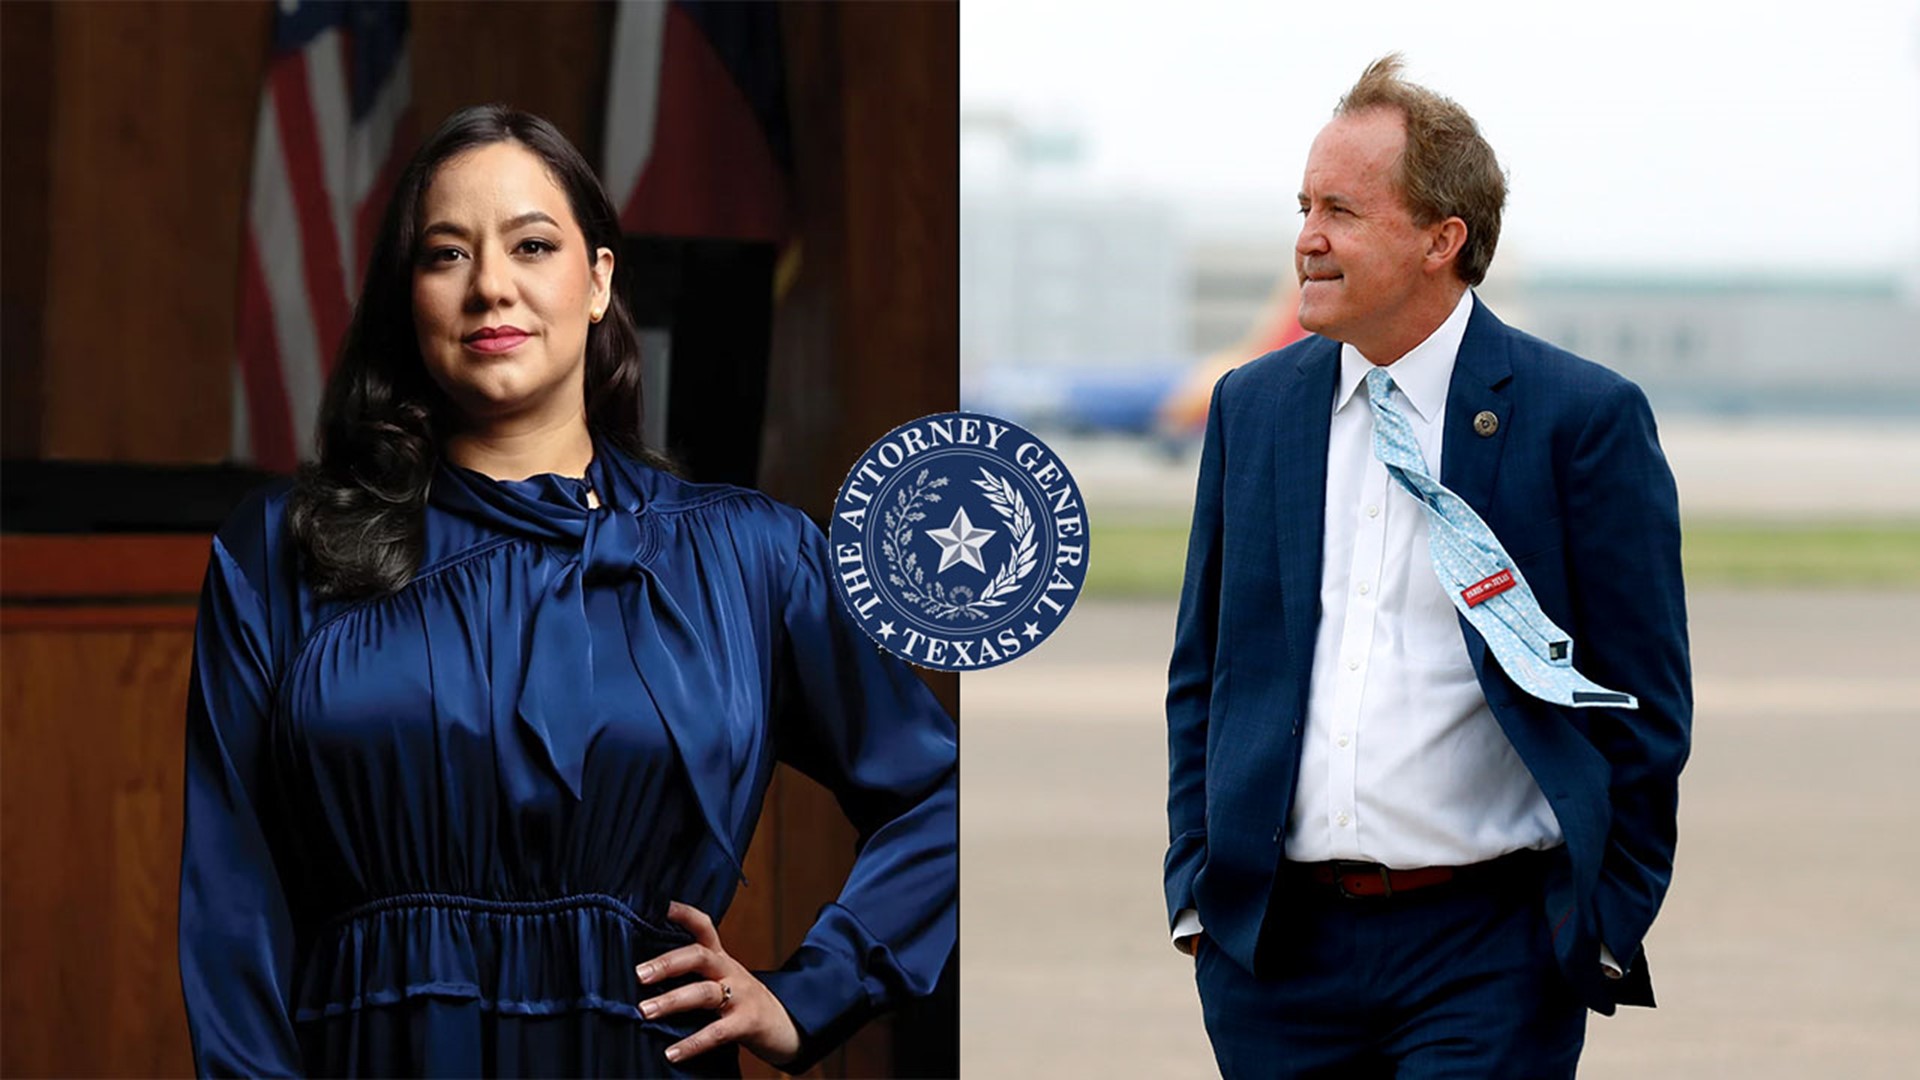 Democratic candidate Rochelle Garza trails behind Republican incumbent Ken Paxton by 5% in the latest poll.